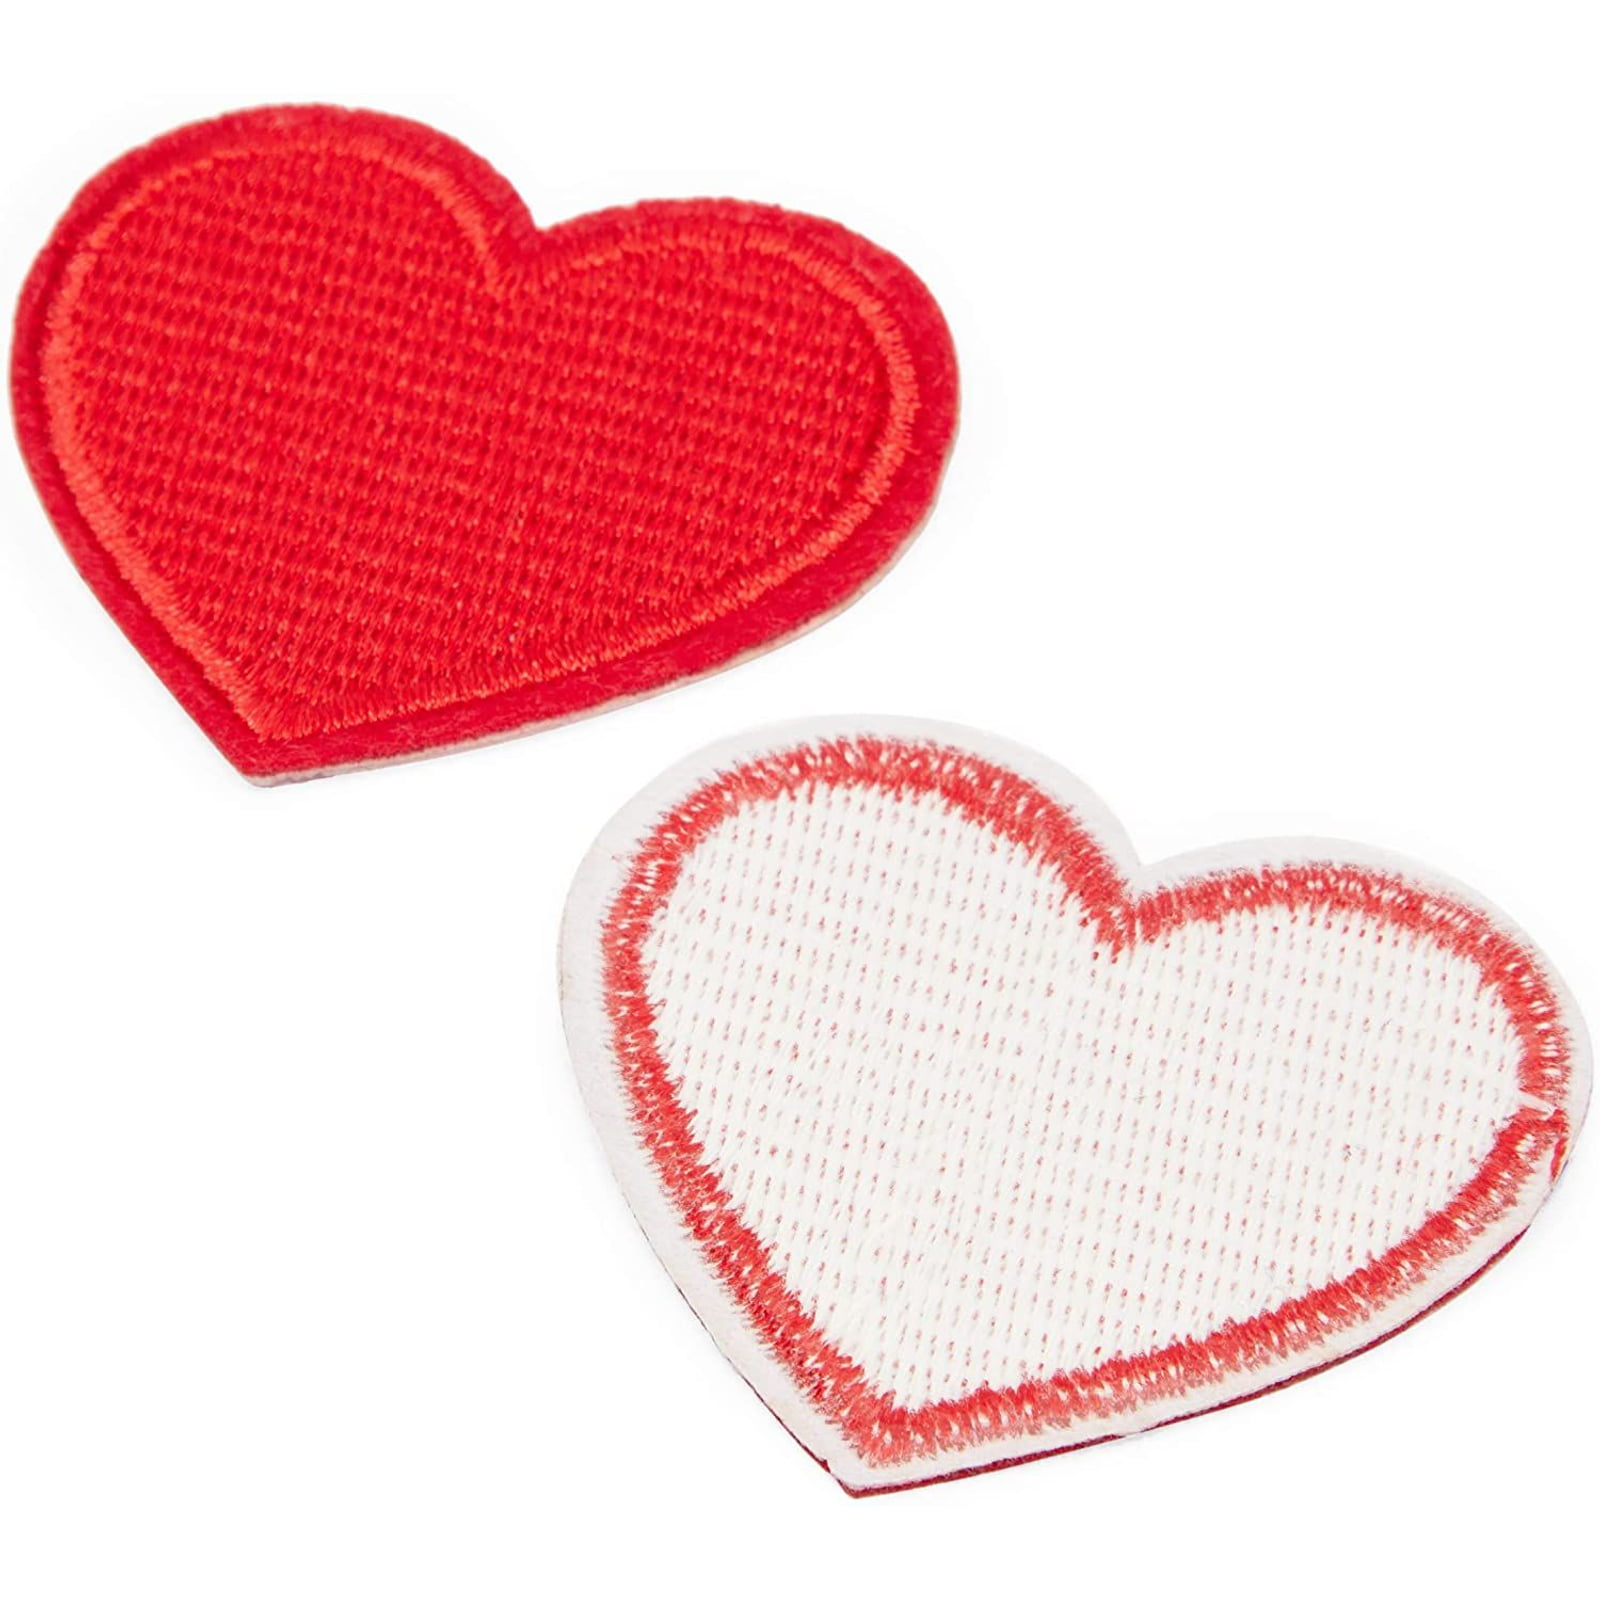 A-158 Iron On Patches 3.2 x 3.1 cm Red Heart Patch 15 pcs Iron On Patch Embroidered Applique1.29 x 1.22 inches 